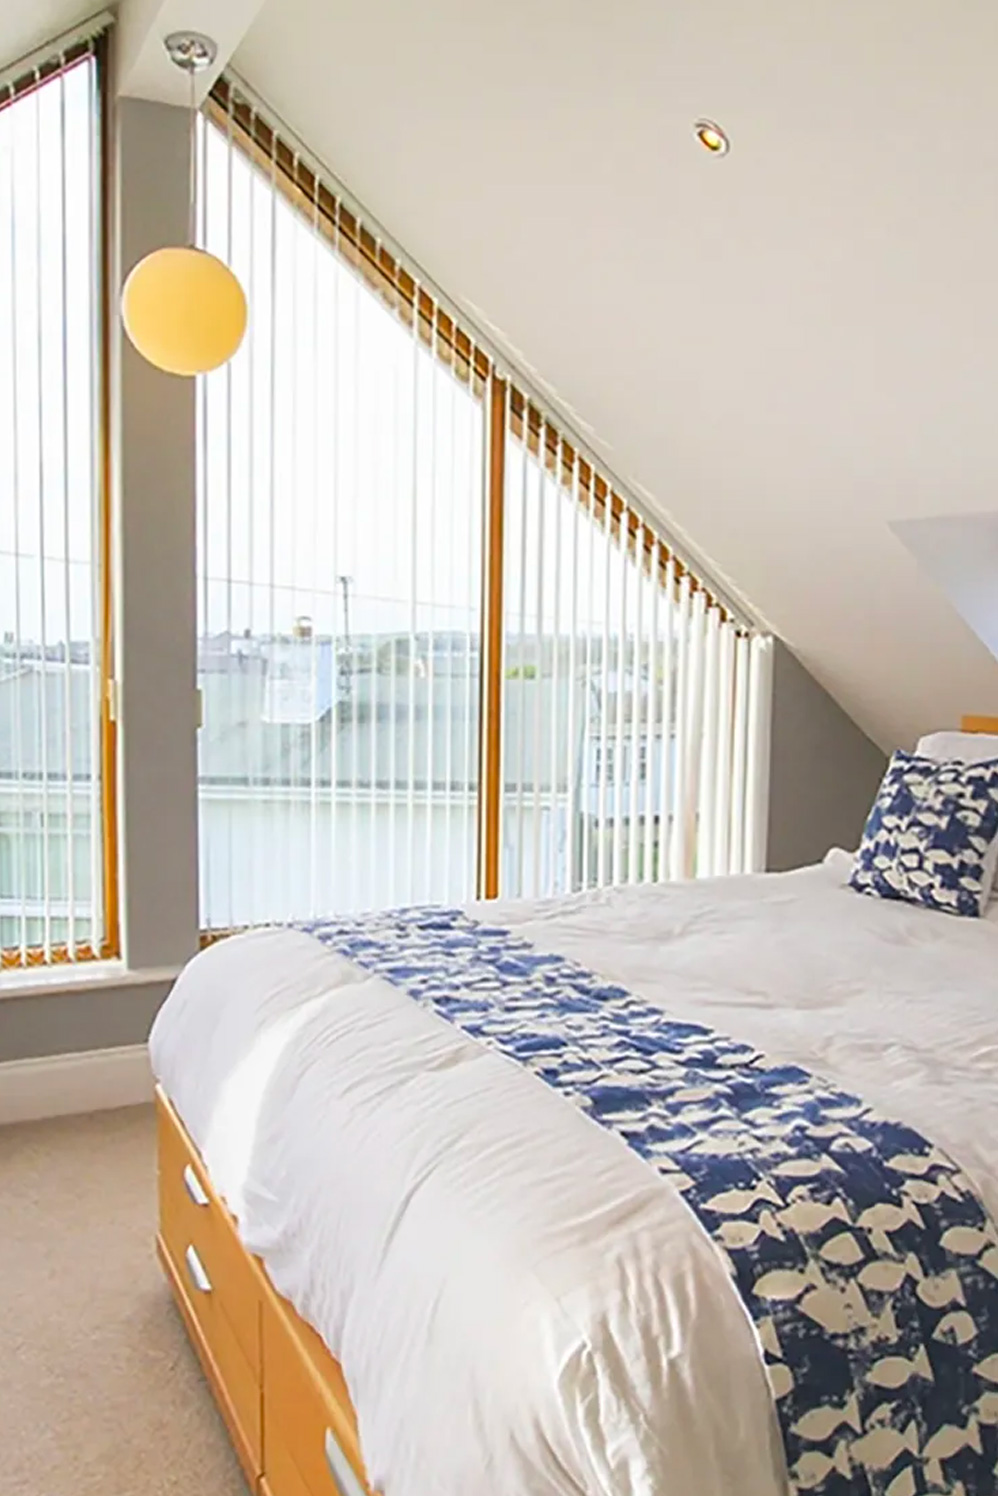 Penmynydd: Bedrooms | Holiday Home in Anglesey